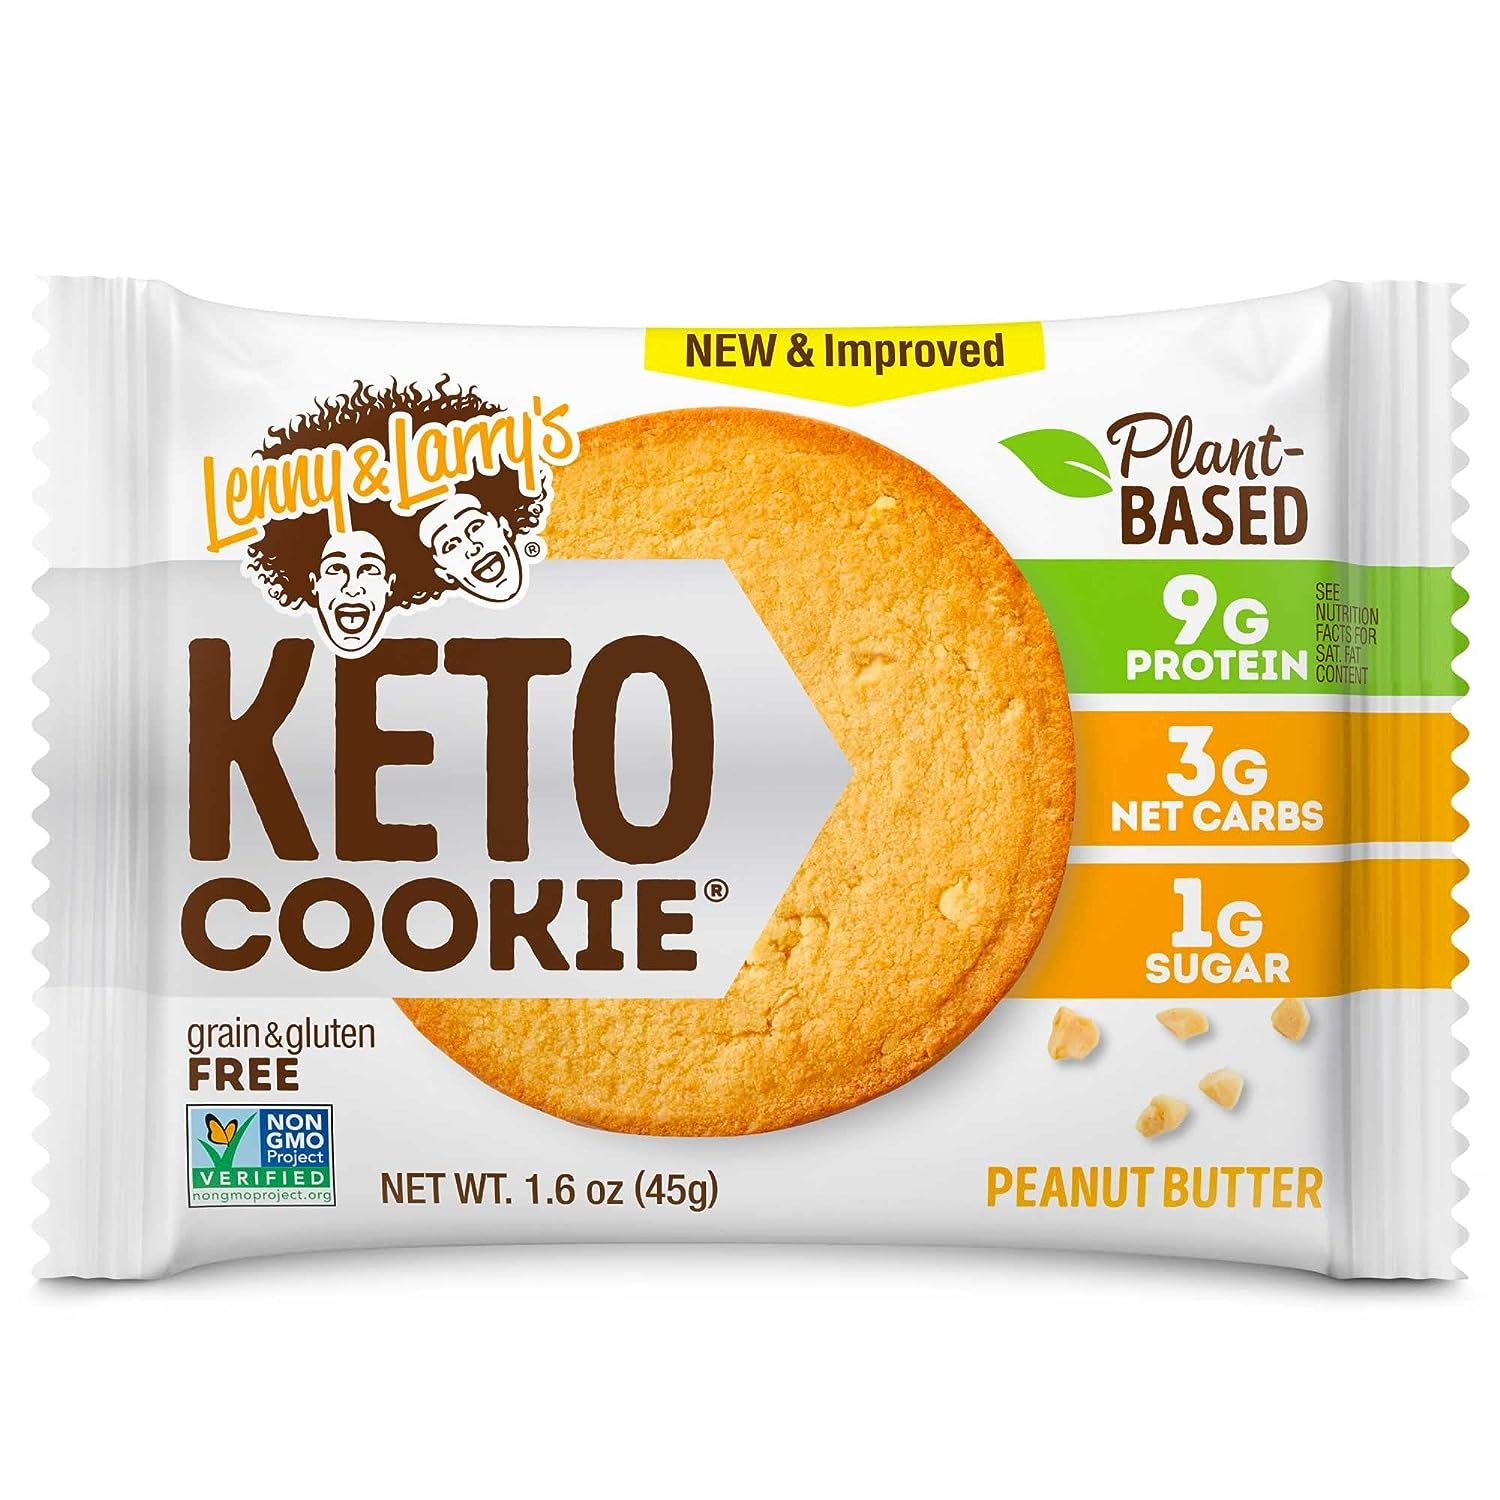 Lenny & Larry's Keto Cookie, Peanut Butter, Soft Baked, 9g Plant Protein, 3g Net Carbs, Vegan, Non-GMO 45g